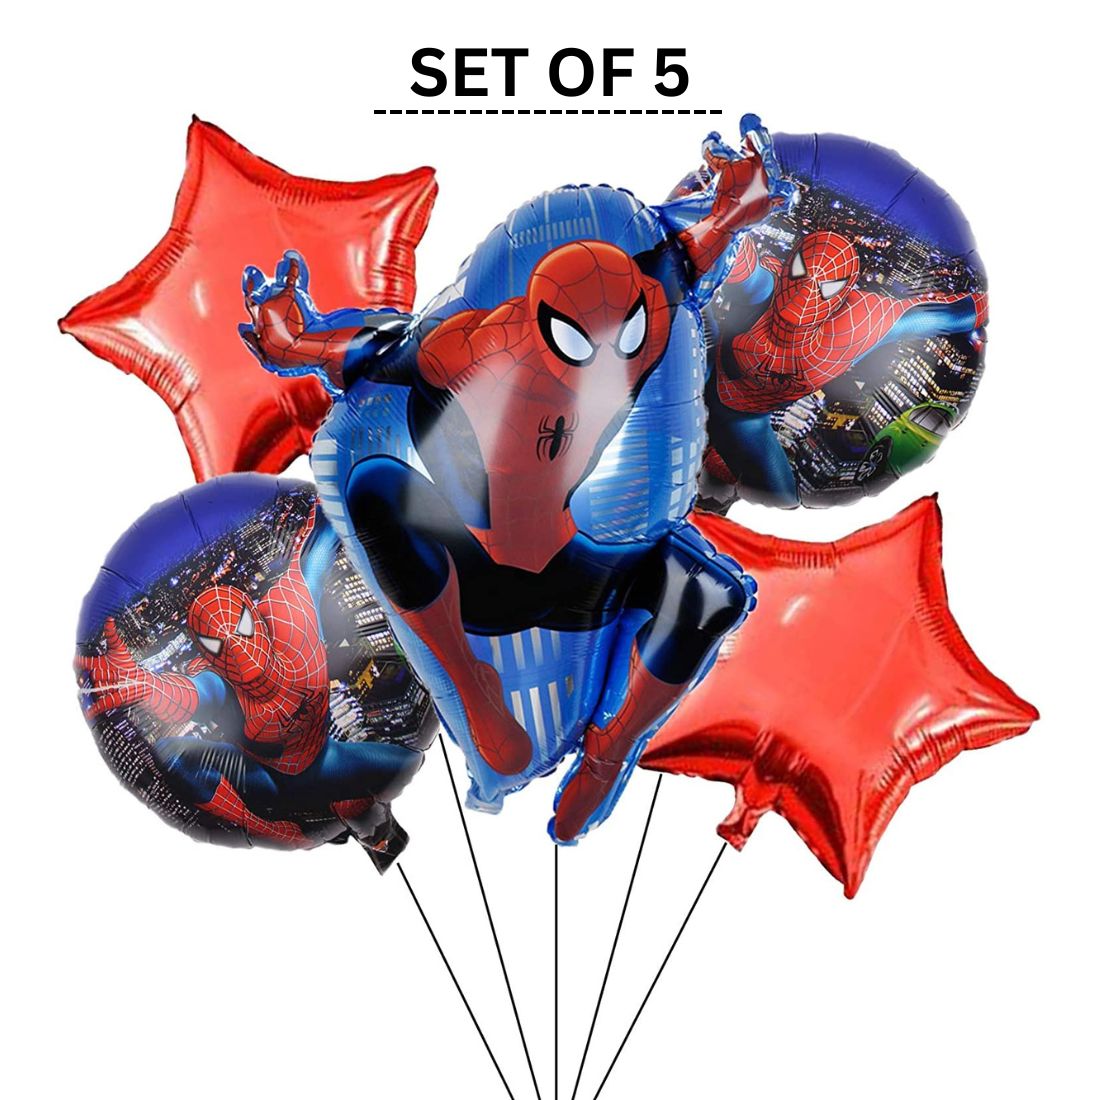 Blue Spider Superhero Foil Balloons Set for Boys Happy Birthday Theme Party Decorations Set of 5